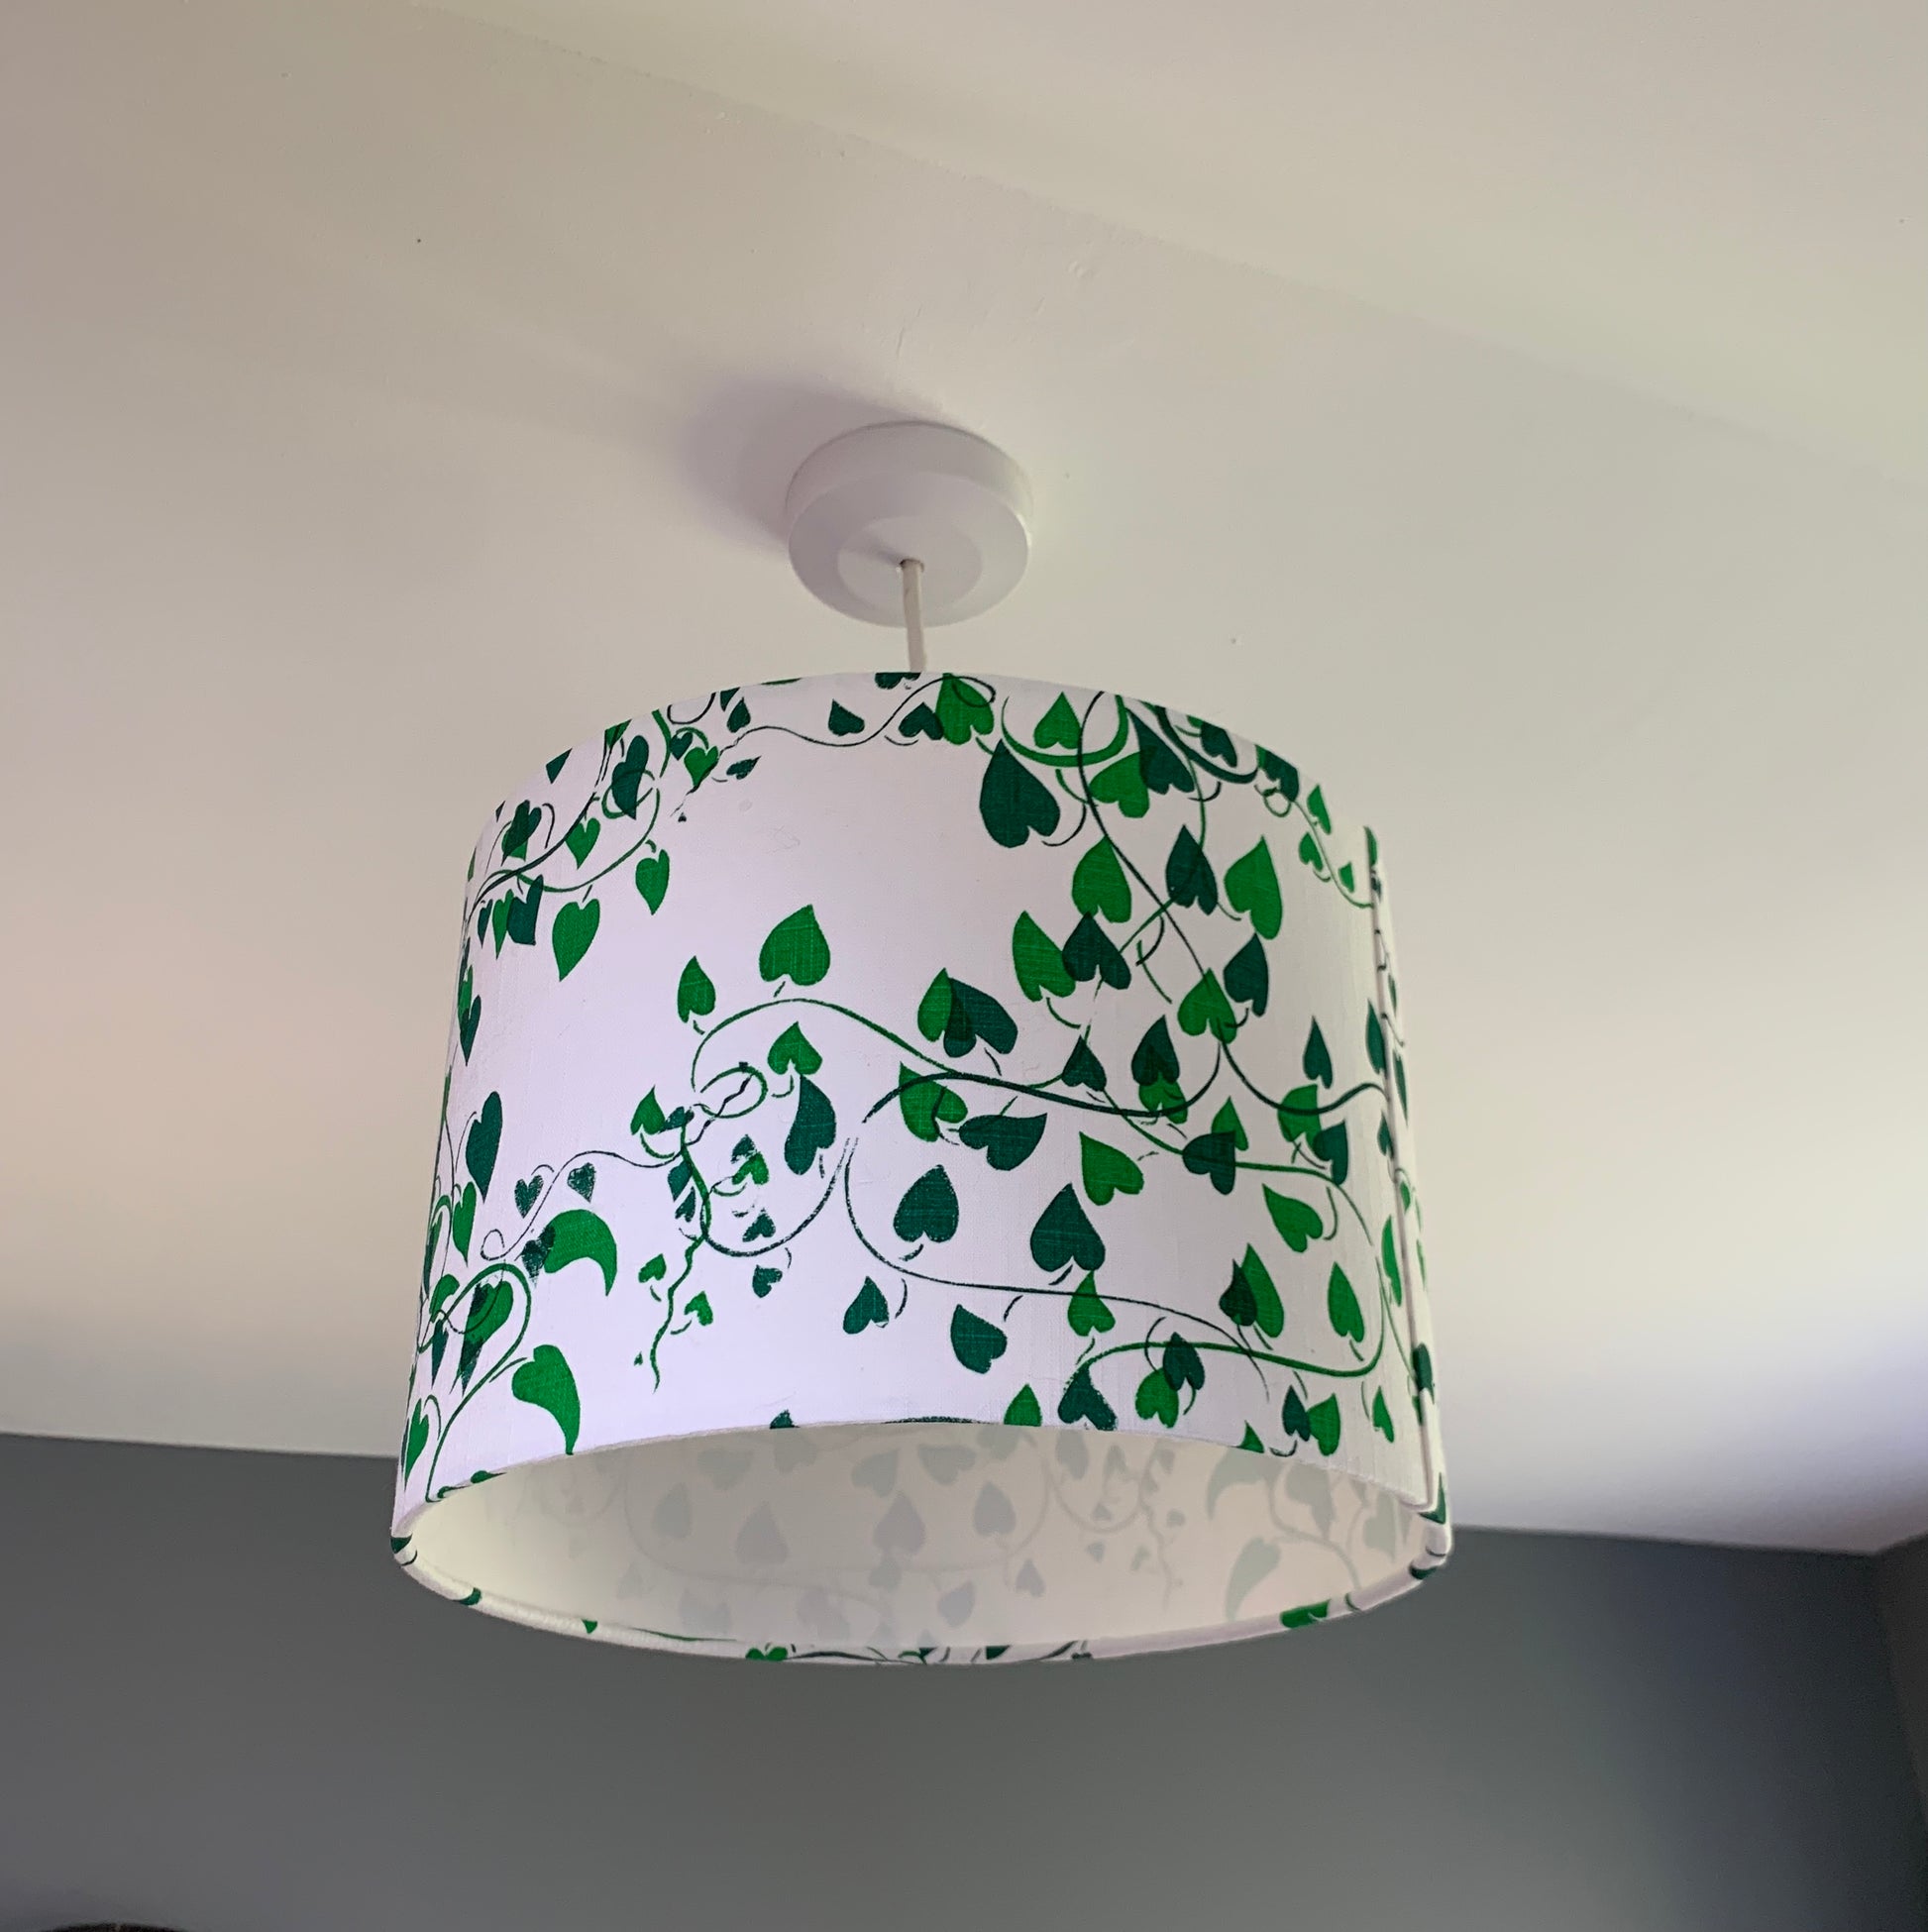 Ceiling hung lampshade with a white linen background and two shades of green convolvulus vines running over it.